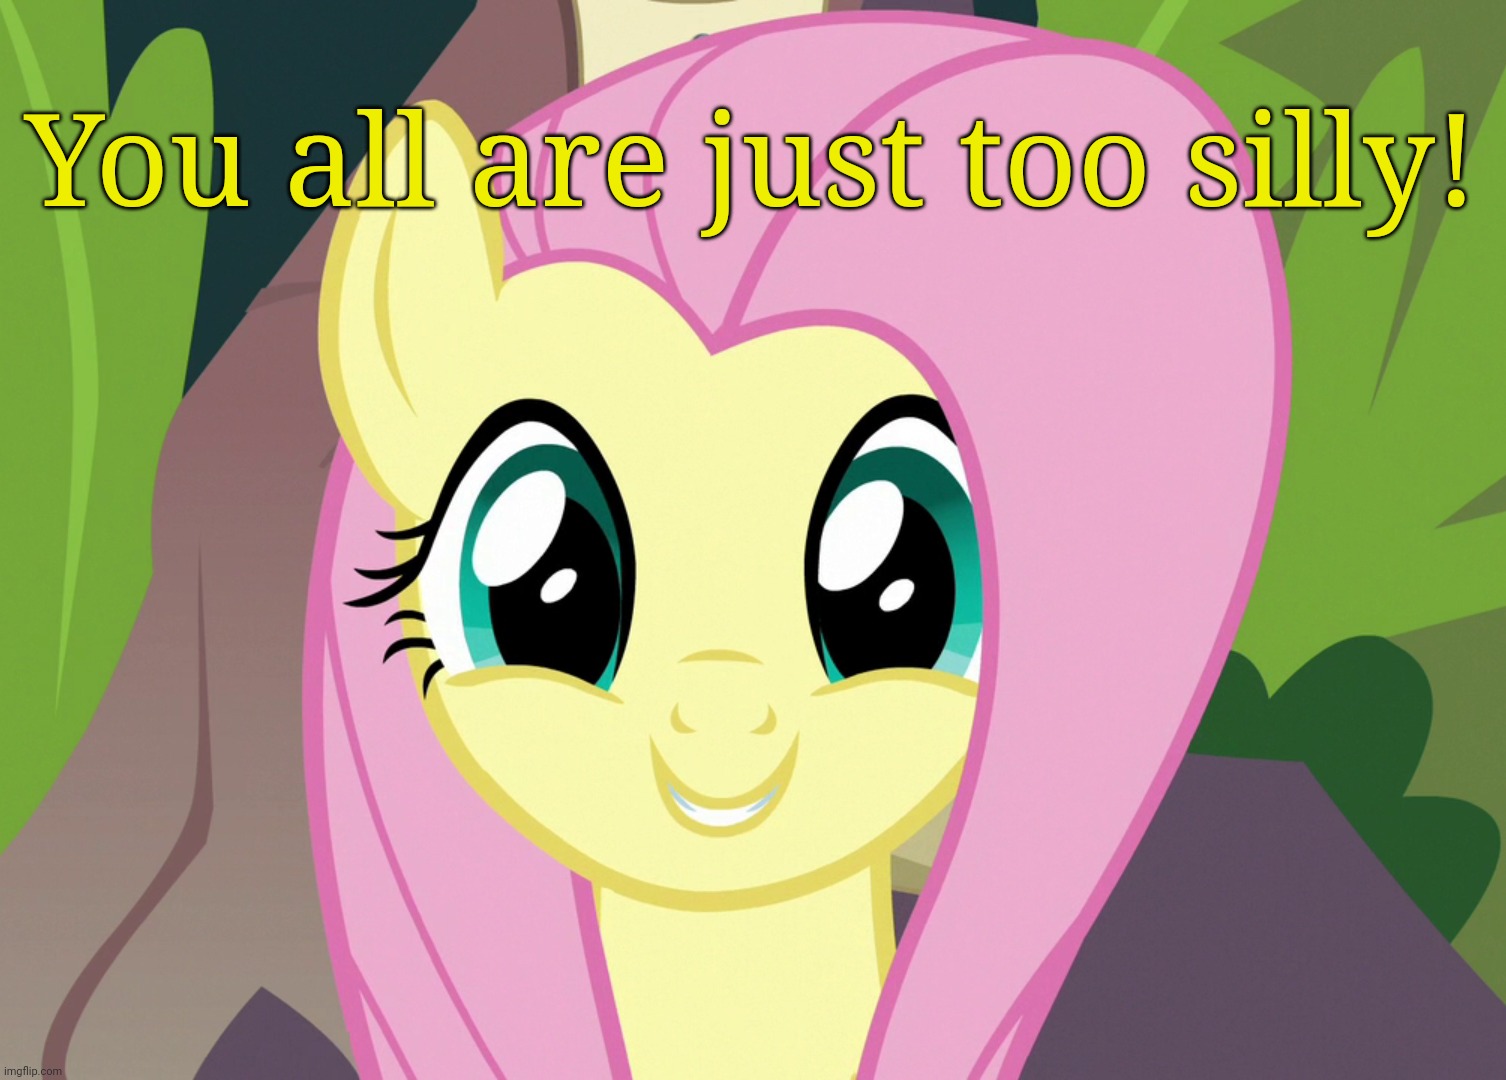 Shyabetes 2 (MLP) | You all are just too silly! | image tagged in shyabetes 2 mlp | made w/ Imgflip meme maker